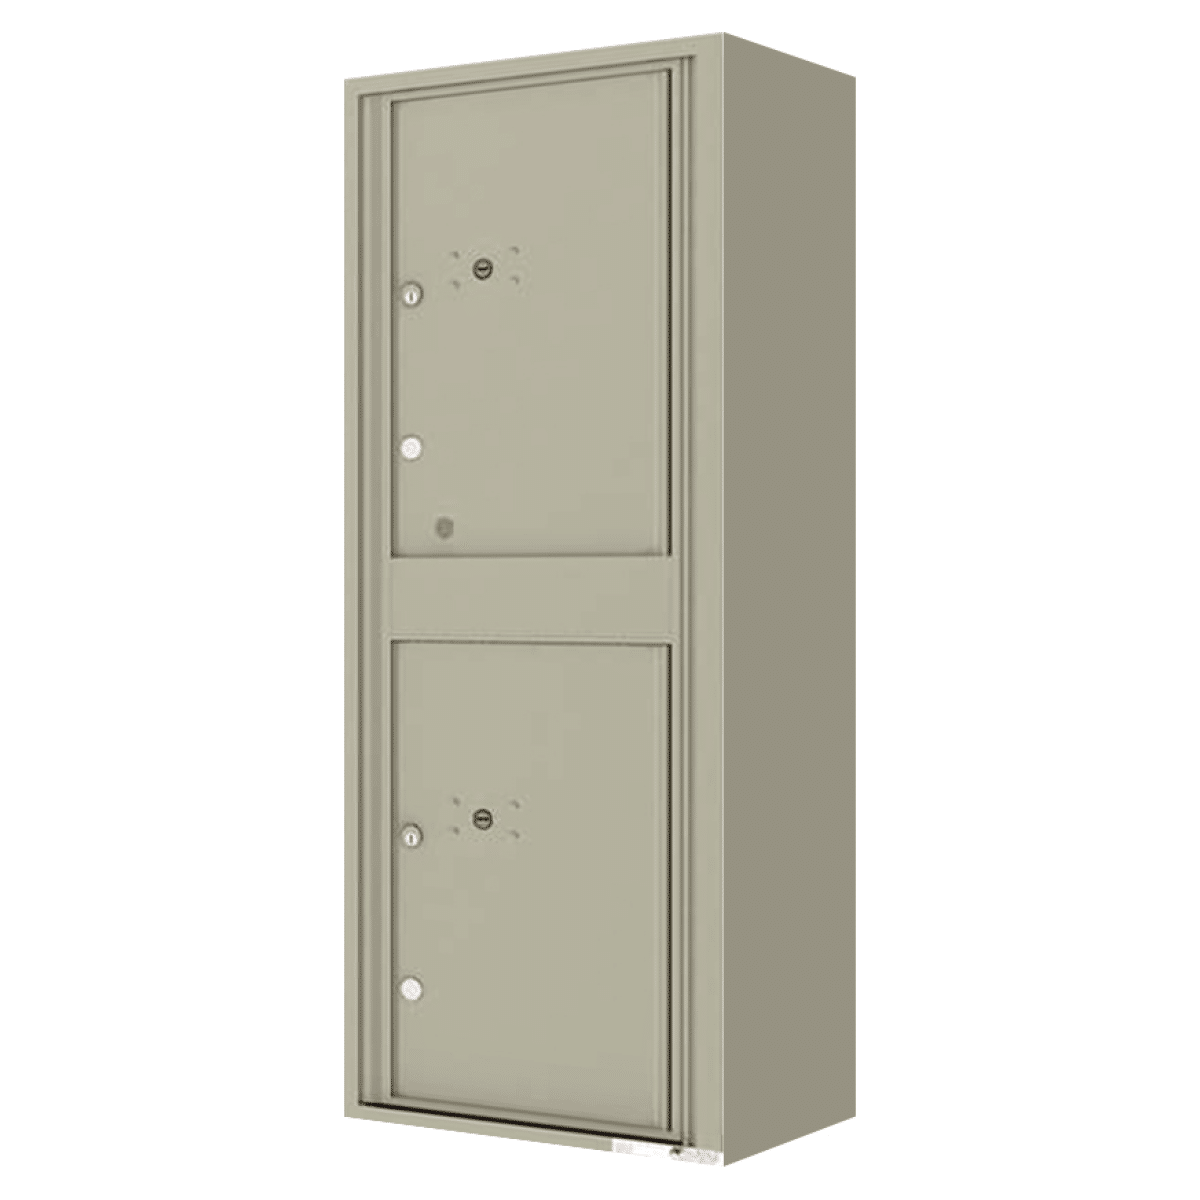 Surface Mount 4C Horizontal Mailbox – 2 Parcel Lockers – Front Loading – 4C13S-2P-SM Product Image